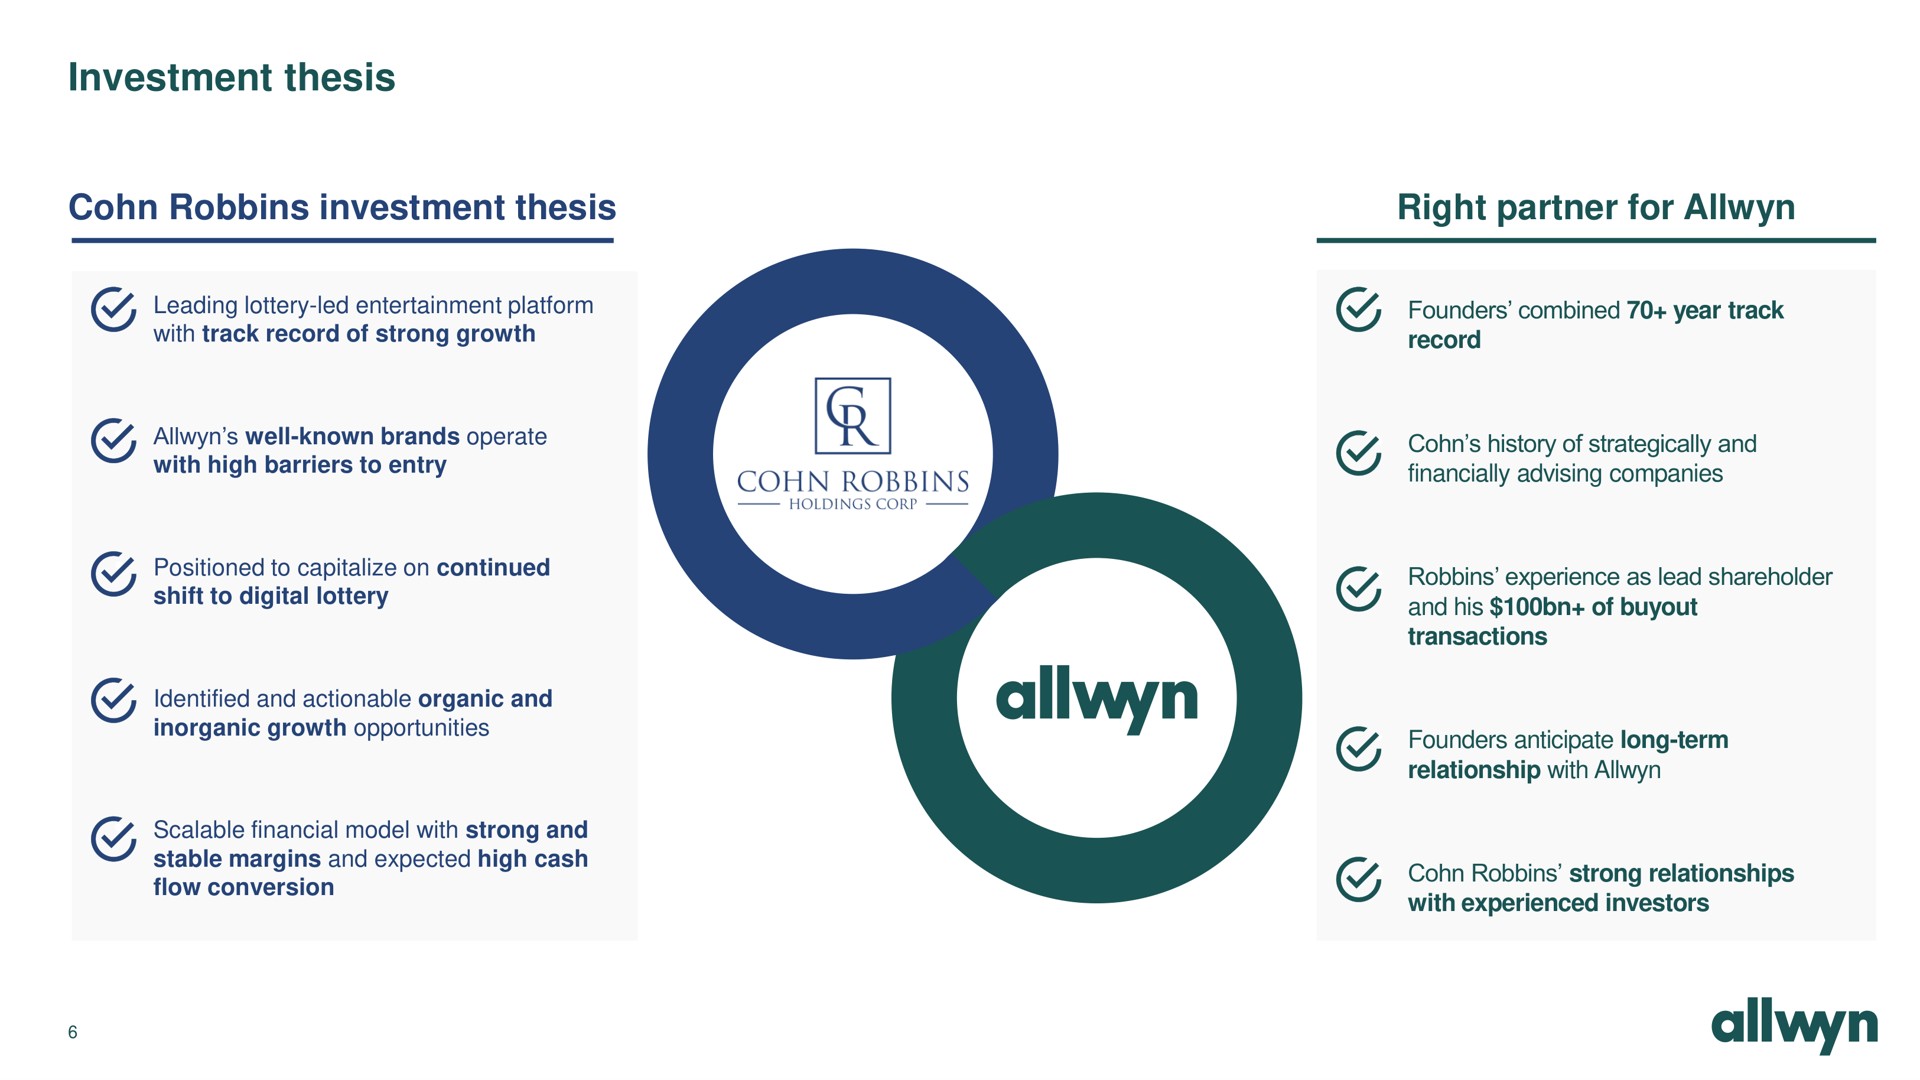 investment thesis investment thesis right partner for inorganic growth opportunities founders anticipate long term | Allwyn